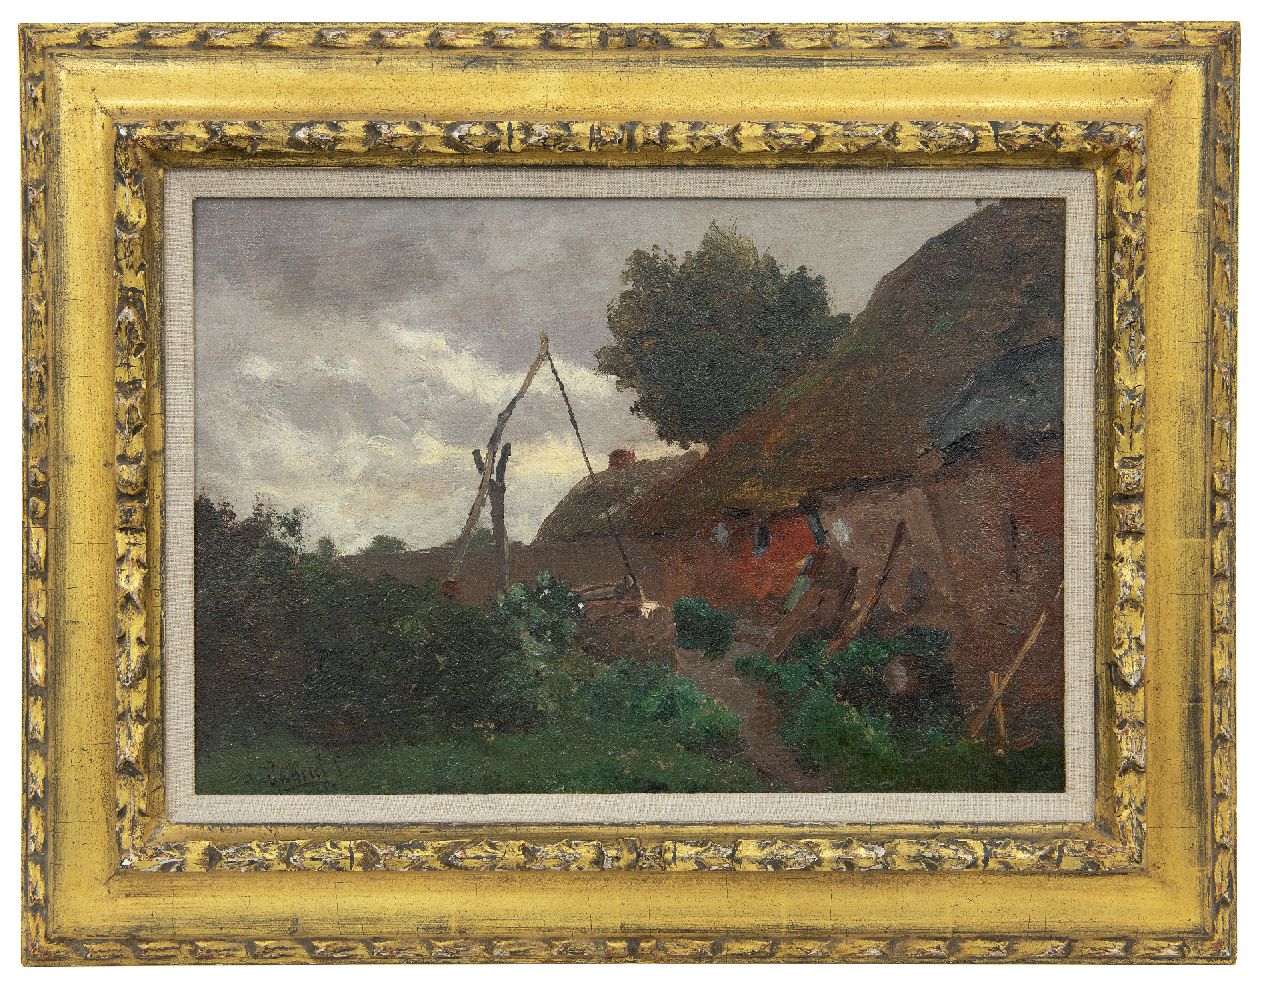 Gabriel P.J.C.  | Paul Joseph Constantin 'Constan(t)' Gabriel | Paintings offered for sale | Farmyard with well, oil on canvas 29.2 x 41.8 cm, signed l.l.